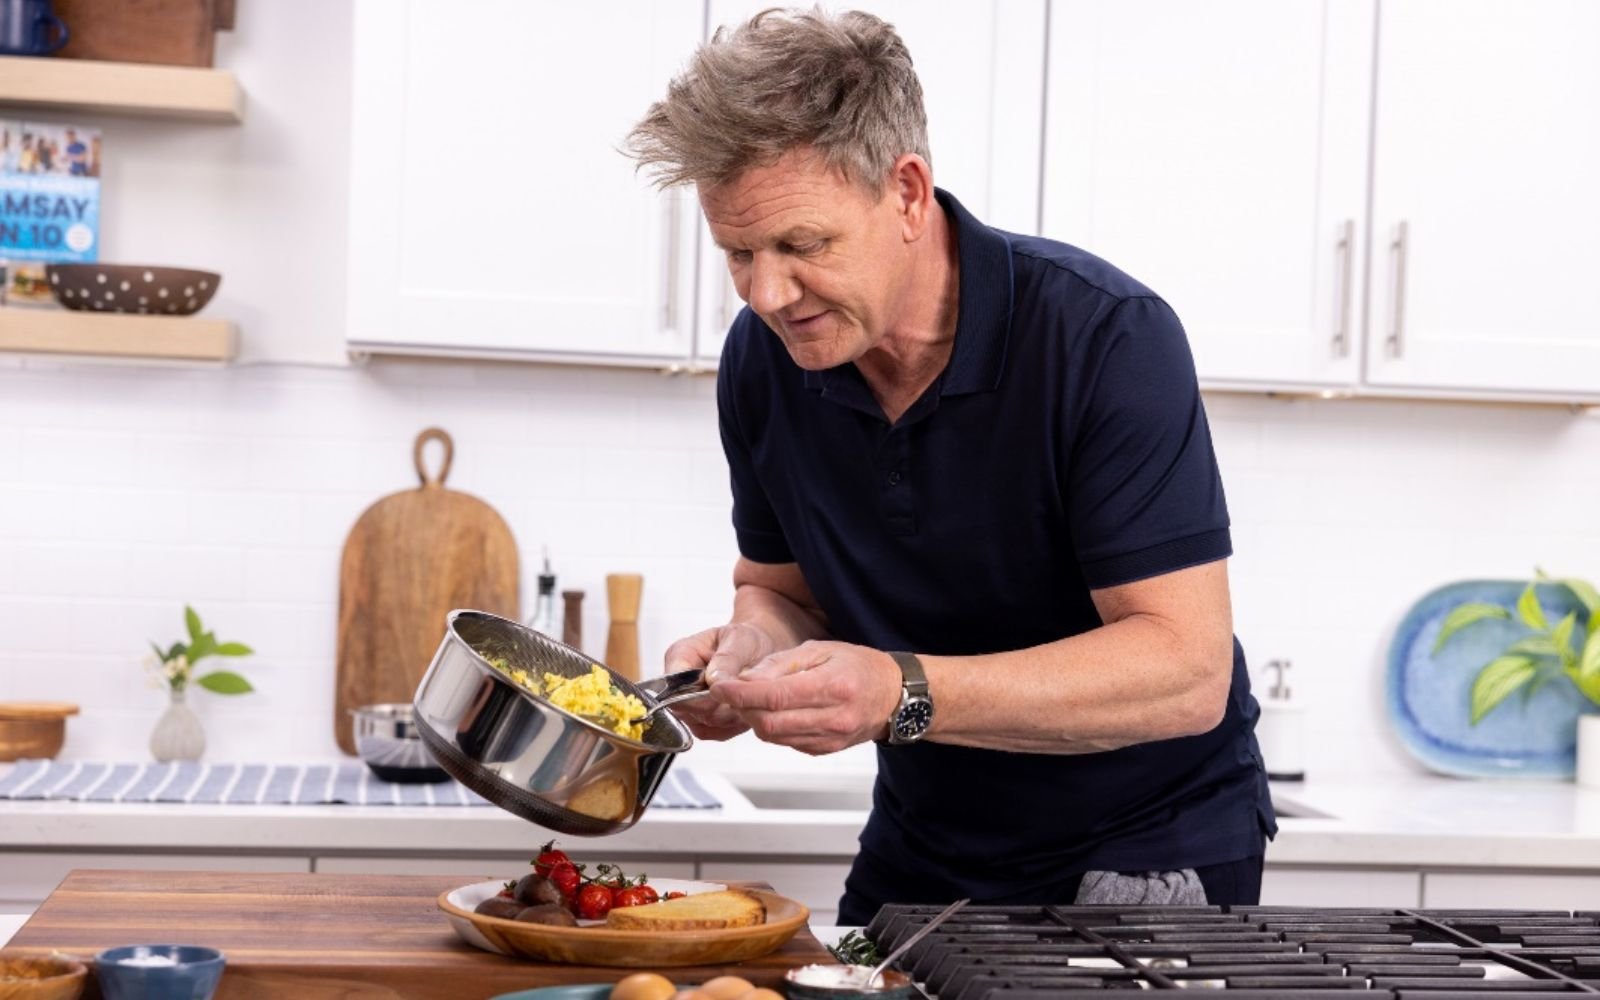 Gordon Ramsay flogs £600 cooking pots after his ITV show Next